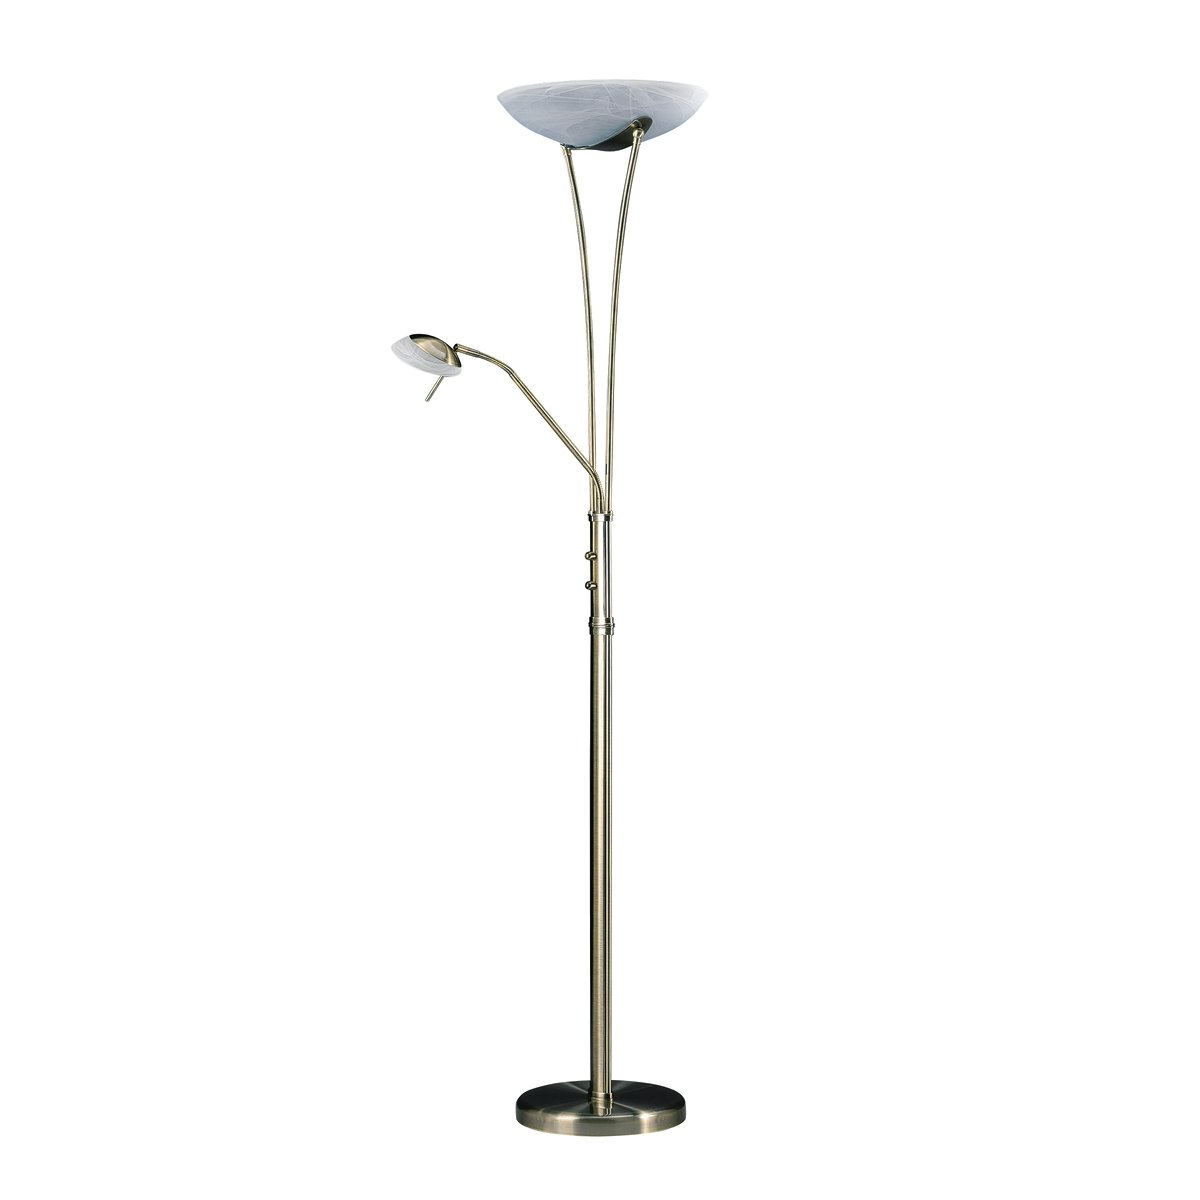 Hot Verilux Planet Light Adjustable Floor Lamp Lamp Natural within dimensions 1200 X 1200